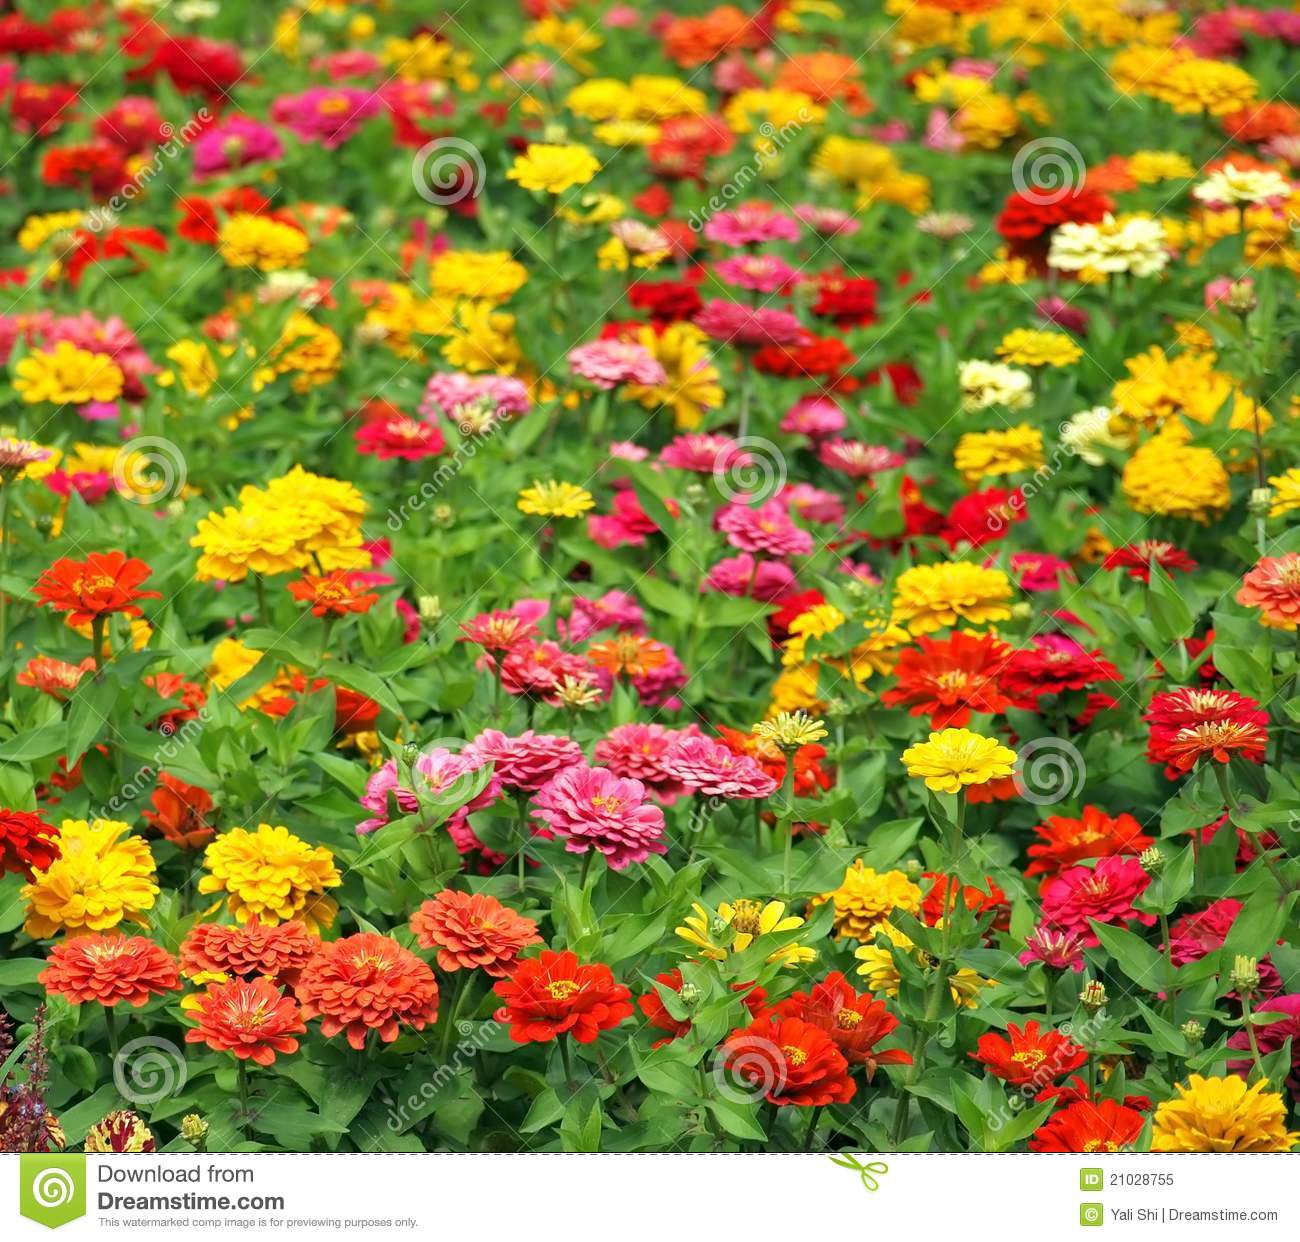 Brightly Colored Marigold Flowers Royalty Free Stock Photo   Image